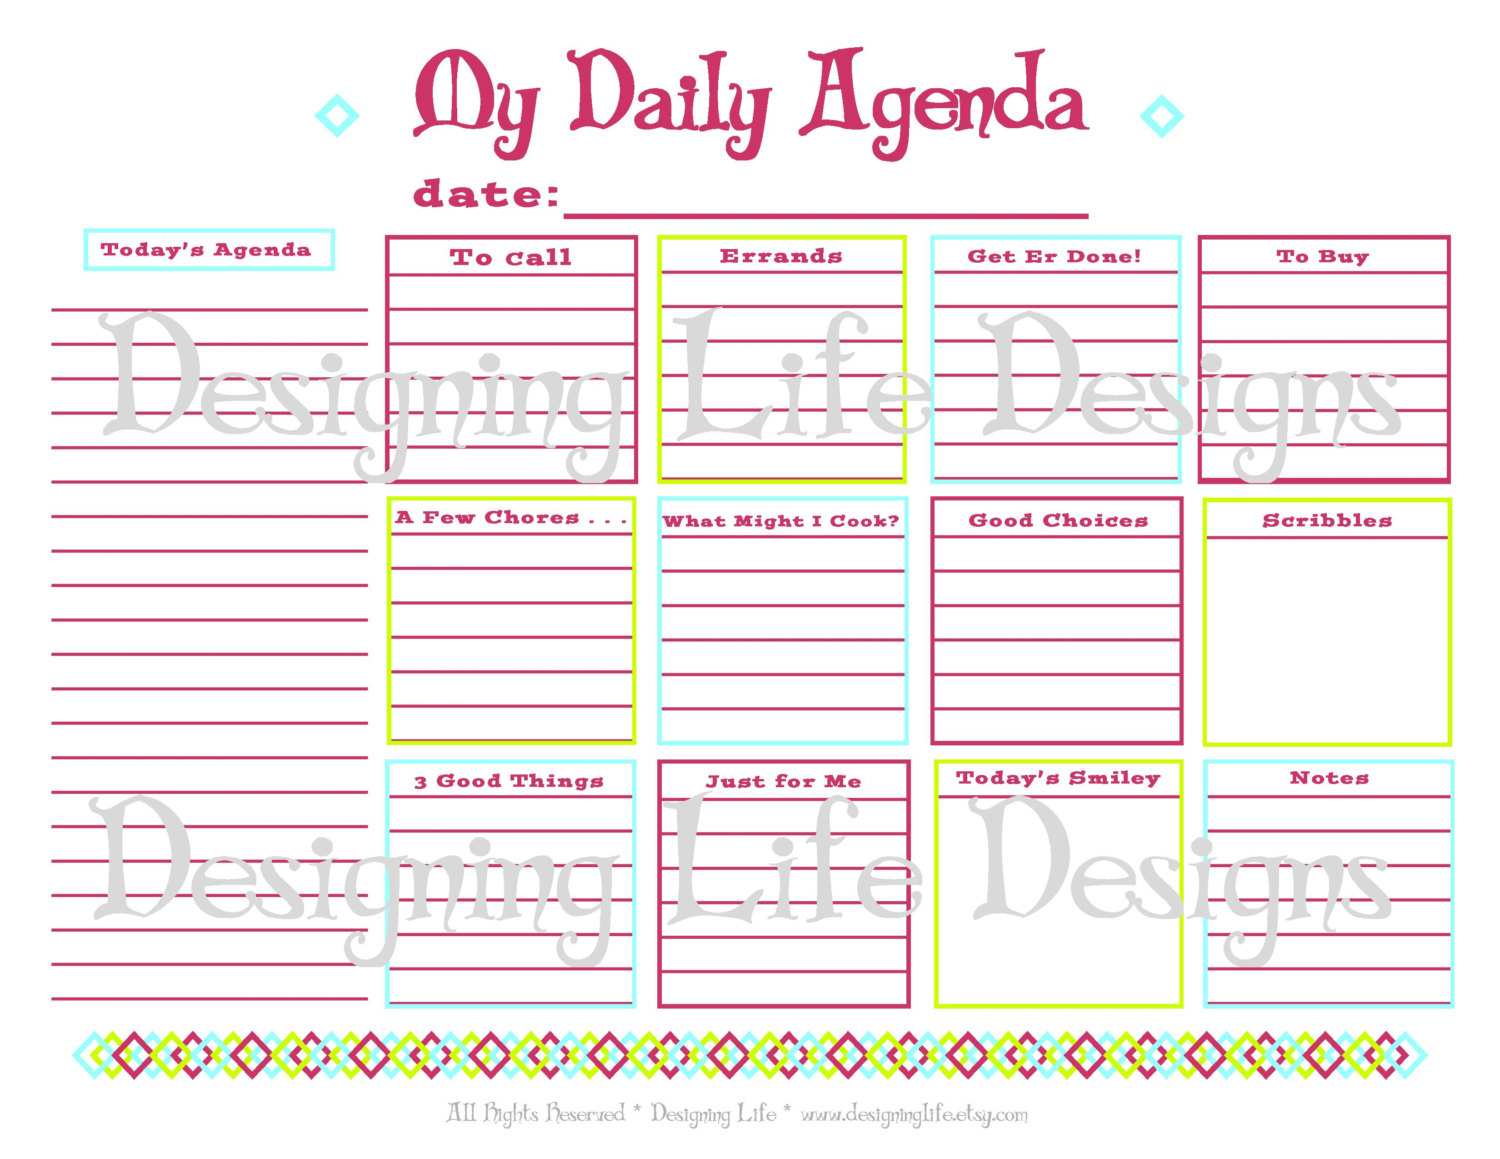 42 Blank Daily Agenda Template 2018 Photo by Daily Agenda Template 2018